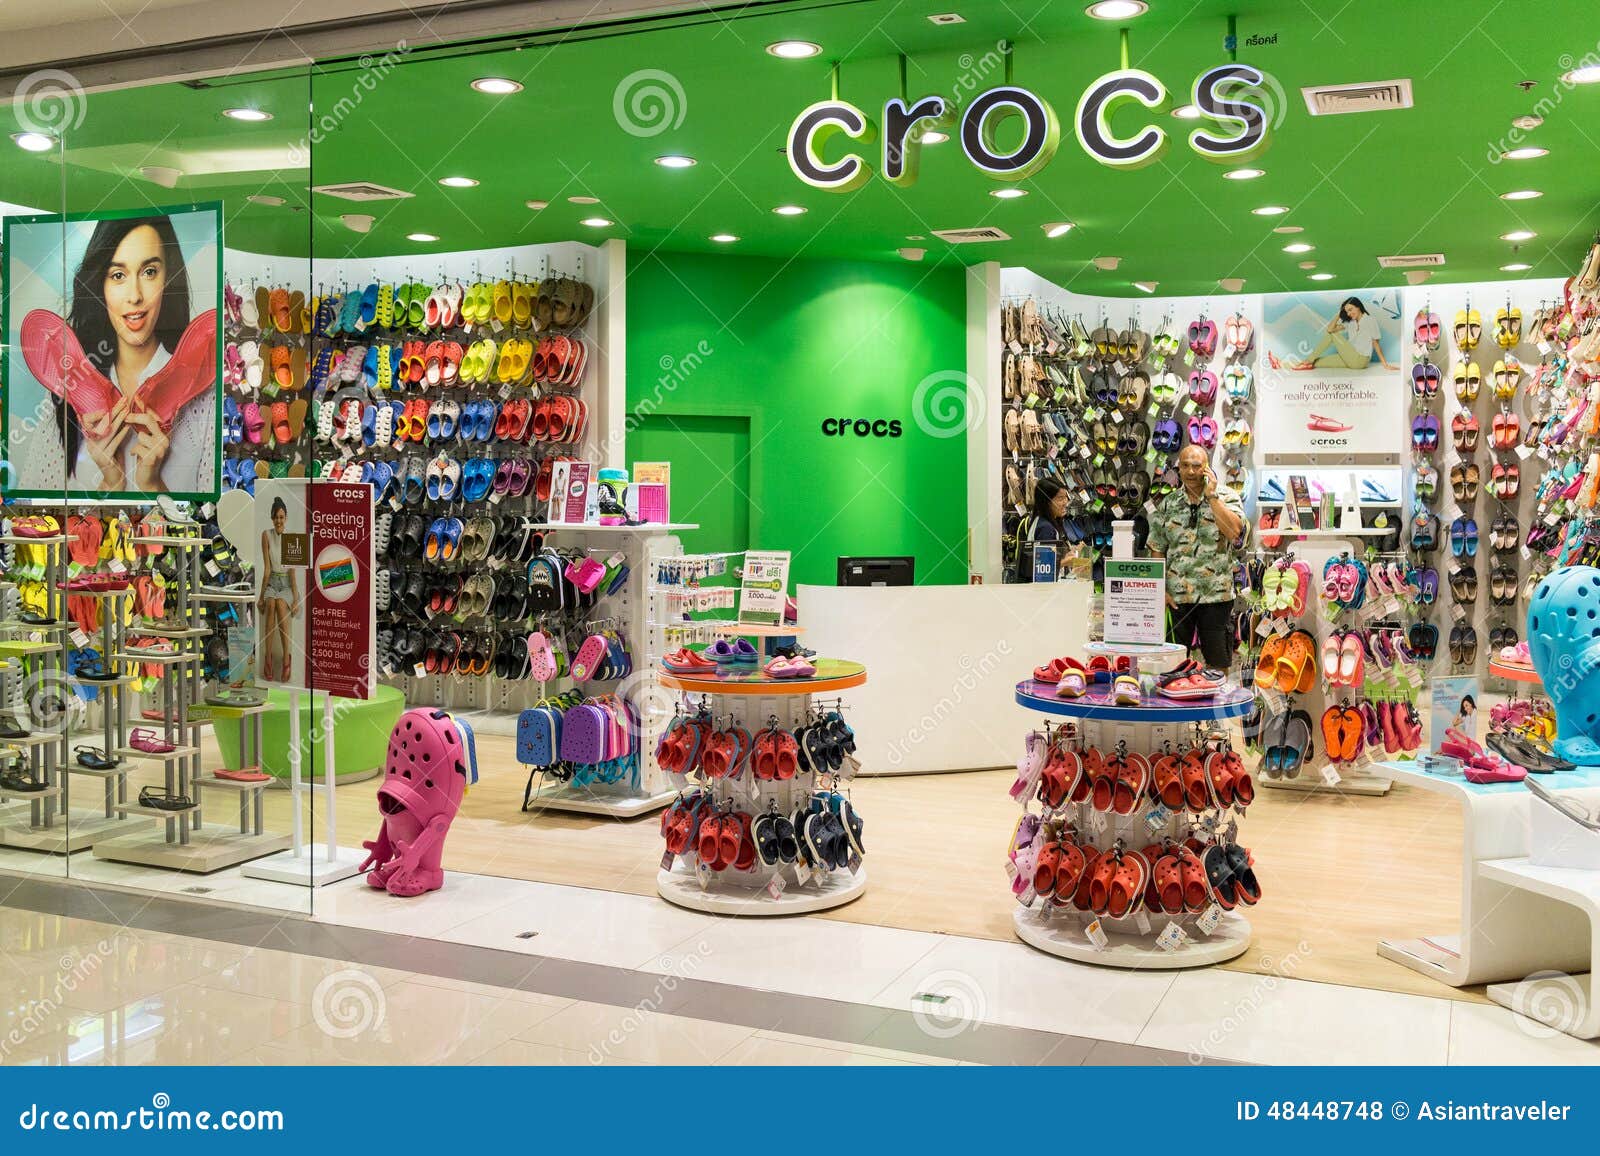 crocs in mall buy clothes shoes online